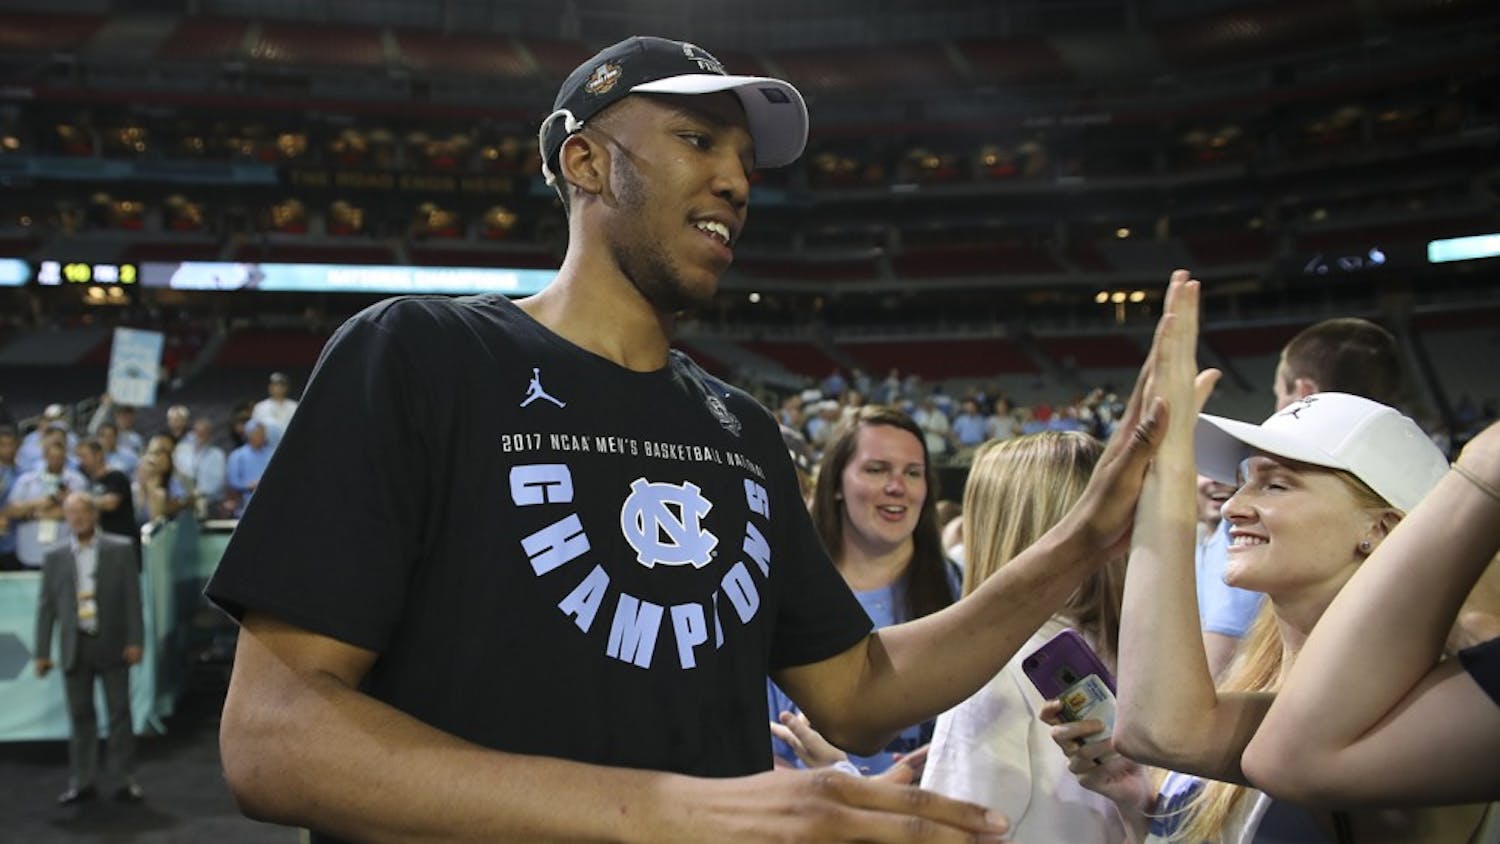 North Carolina forward Tony Bradley greets fans after the men's basketball team's victory in the&nbsp;national championship.